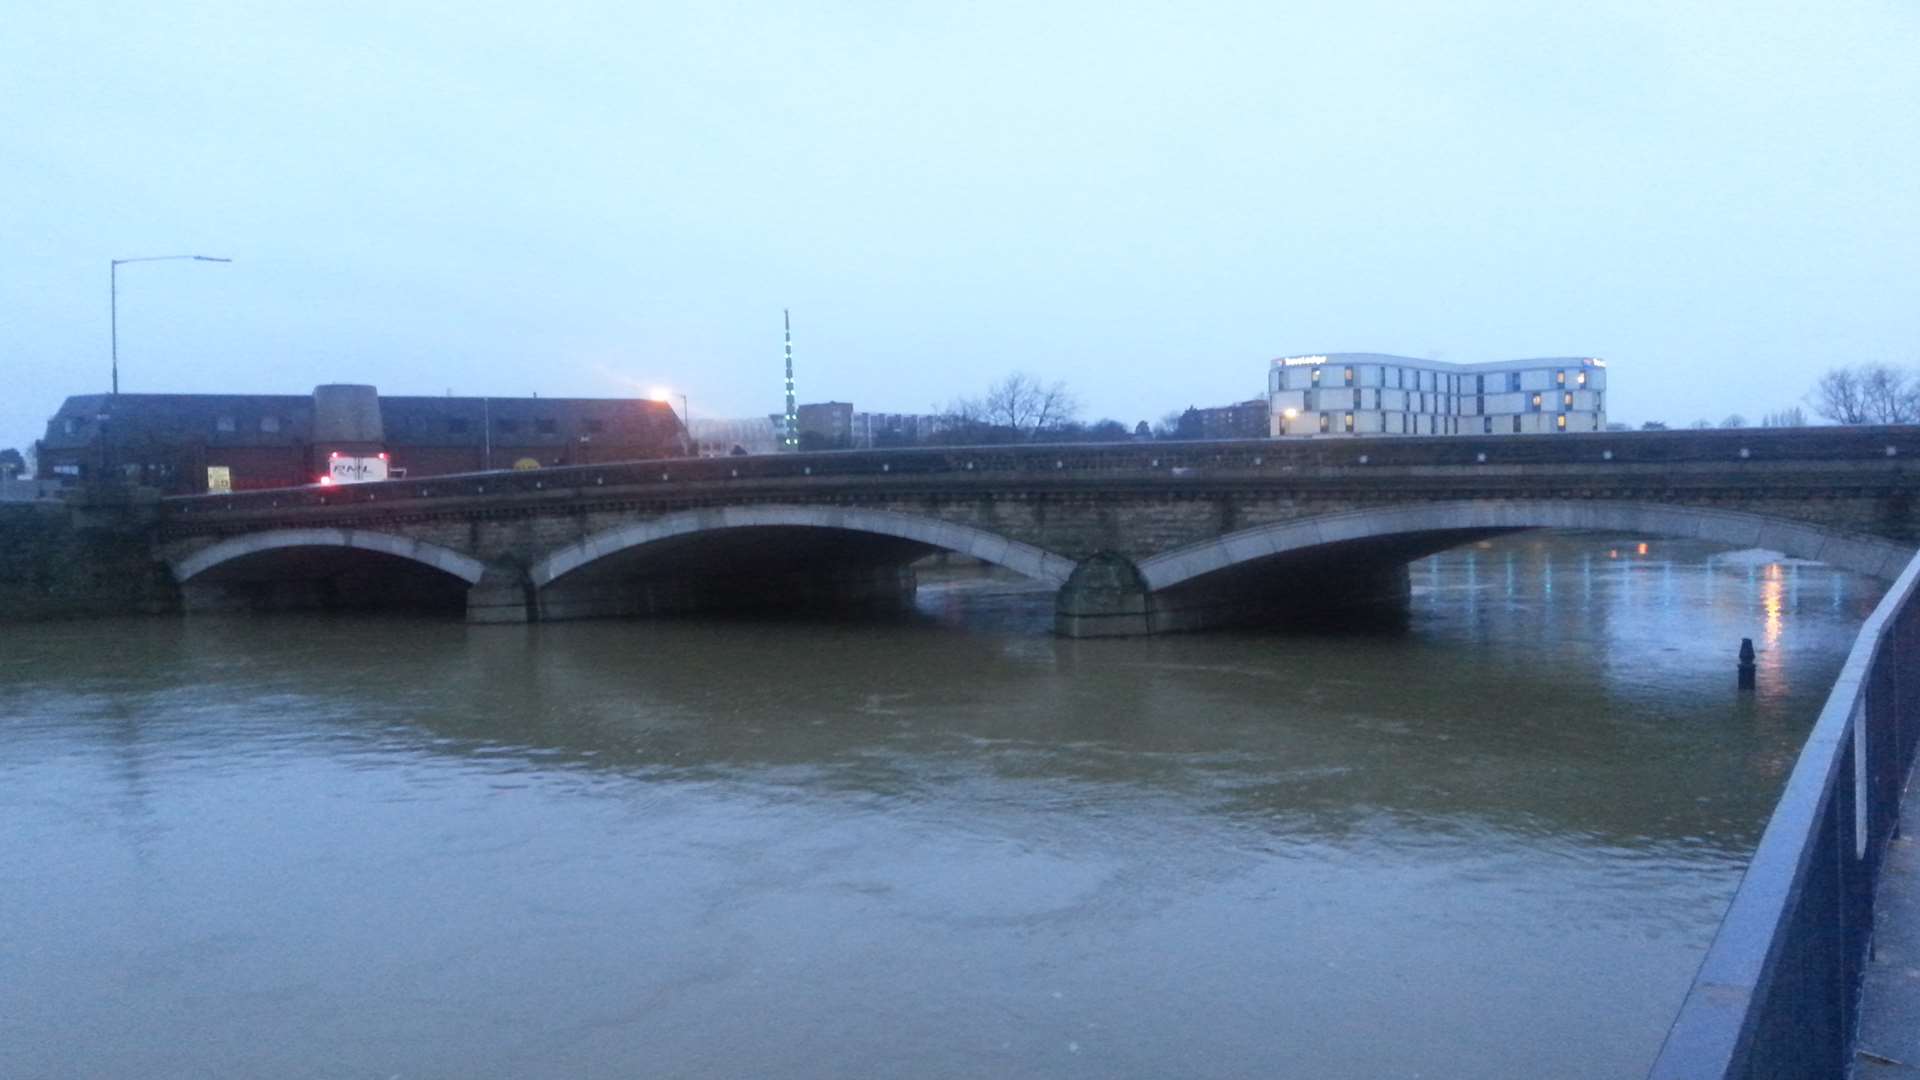 The bridge over the River Medway at Maidstone this morning